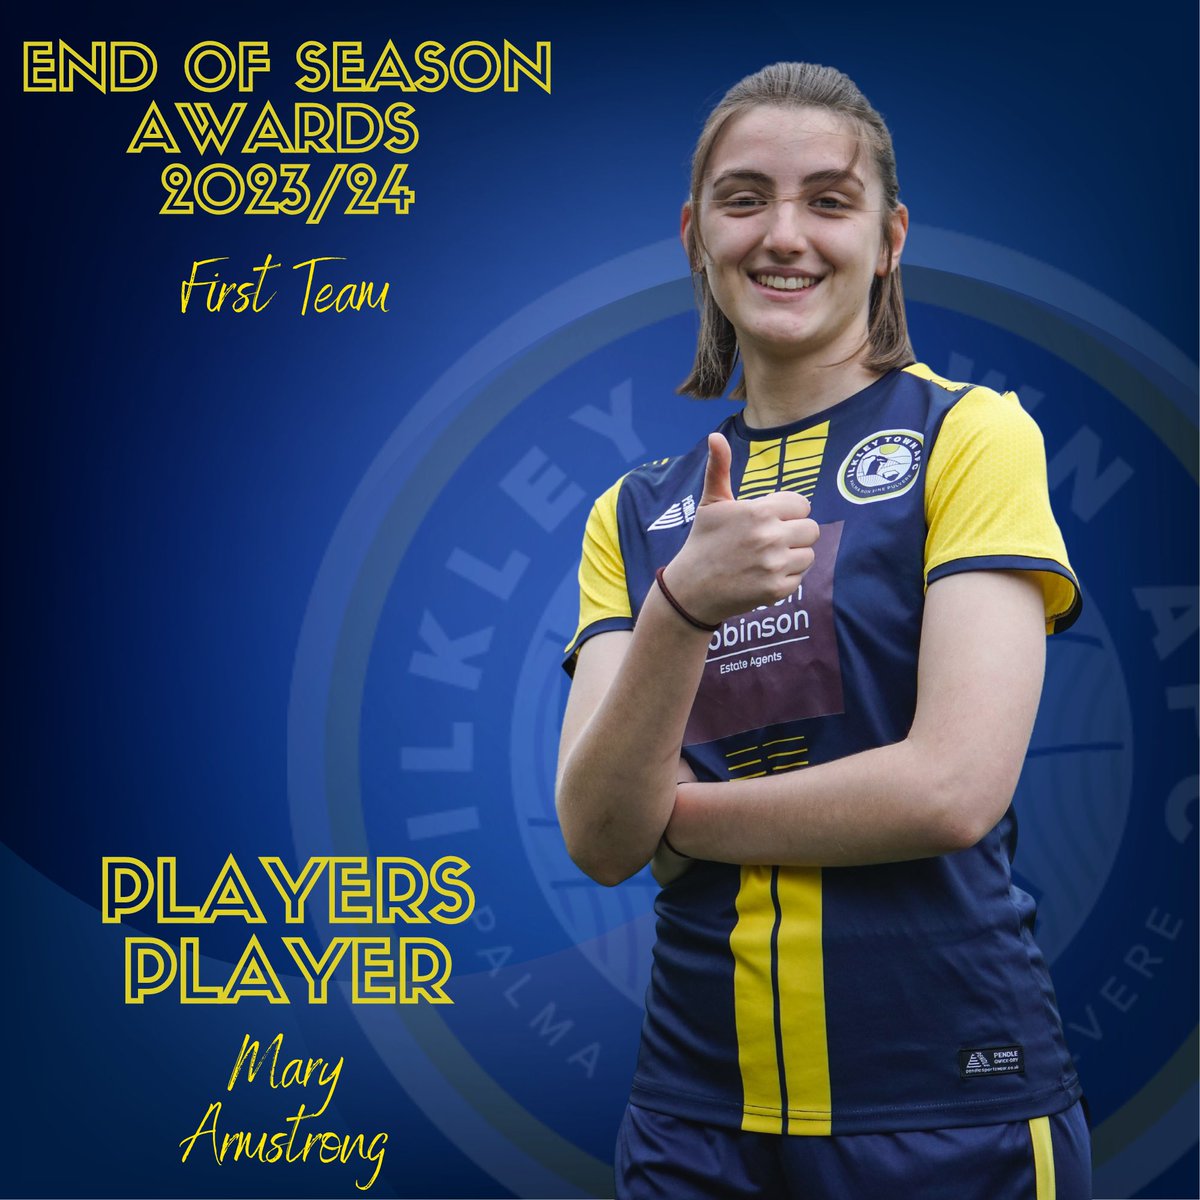 **END OF SEASON AWARDS - PT 2**
A simply phenomenal season for the firsts who broke a number of club records on their way to the league title!
Check out who won the awards………
#ourlionesses #bahtatters #thisgirlcan #hergametoo #footballforall #weonlydopositive